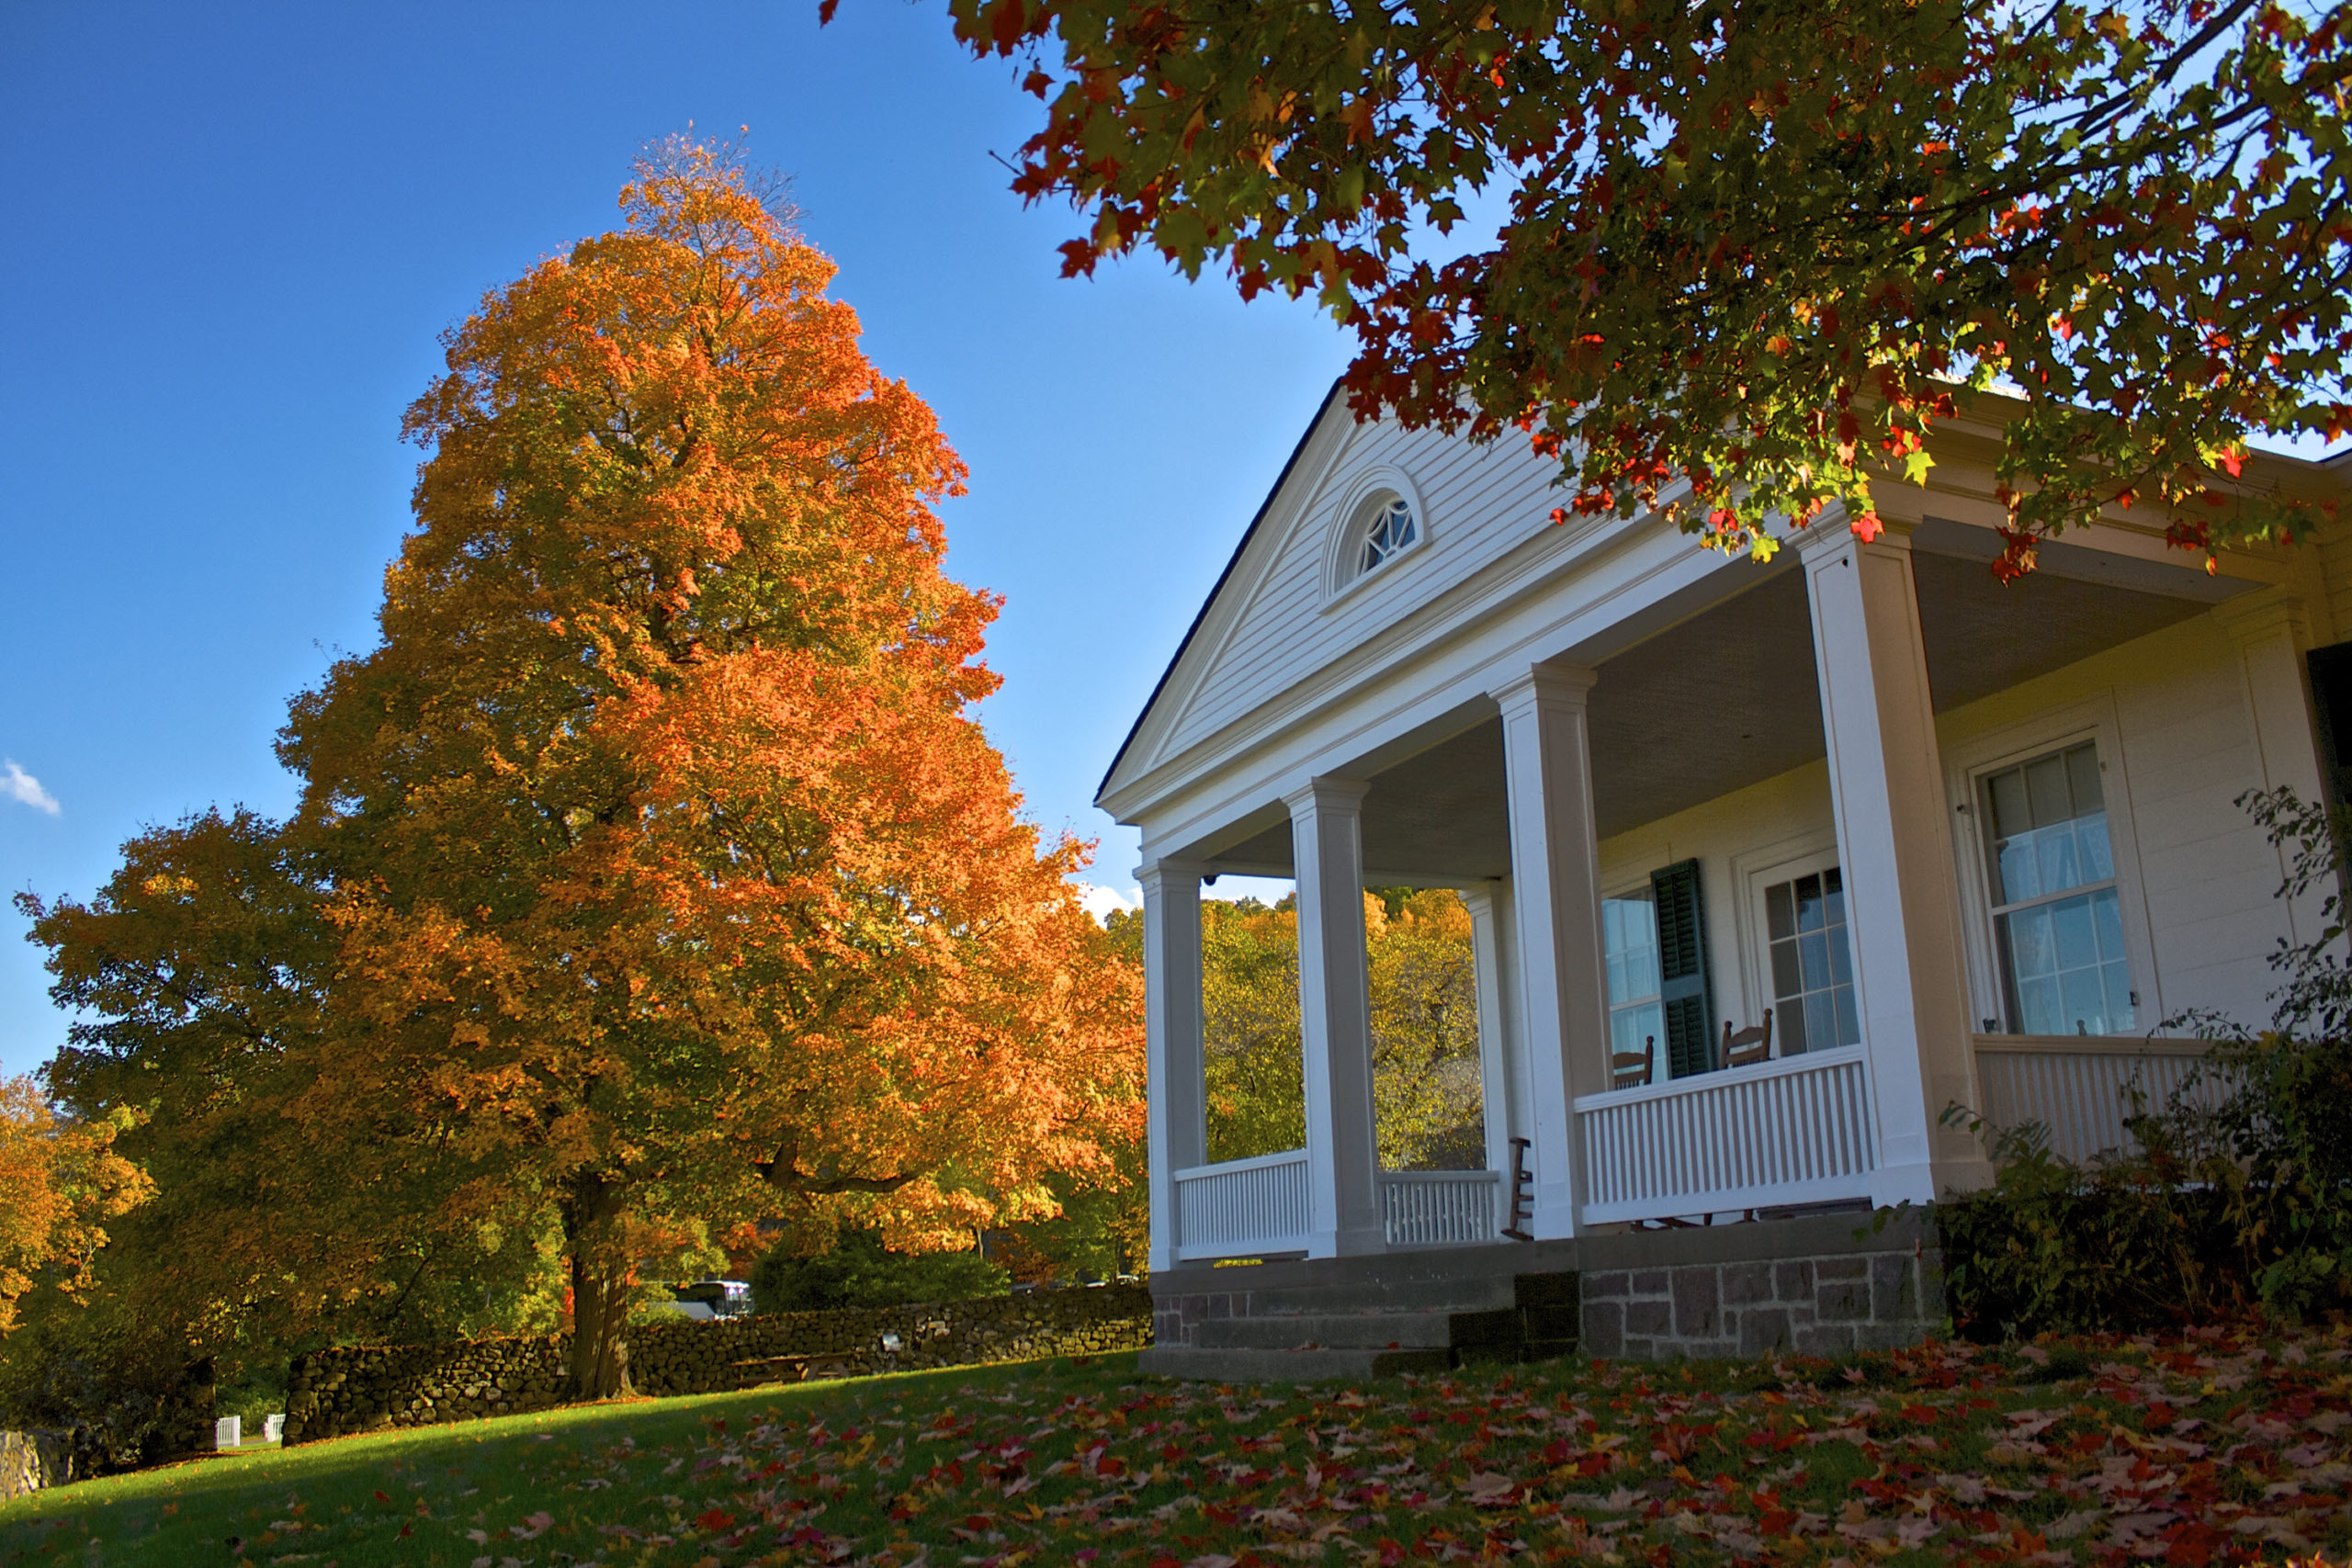 14 Tips to Prepare Your Home for Fall - Deeley Insurance Group